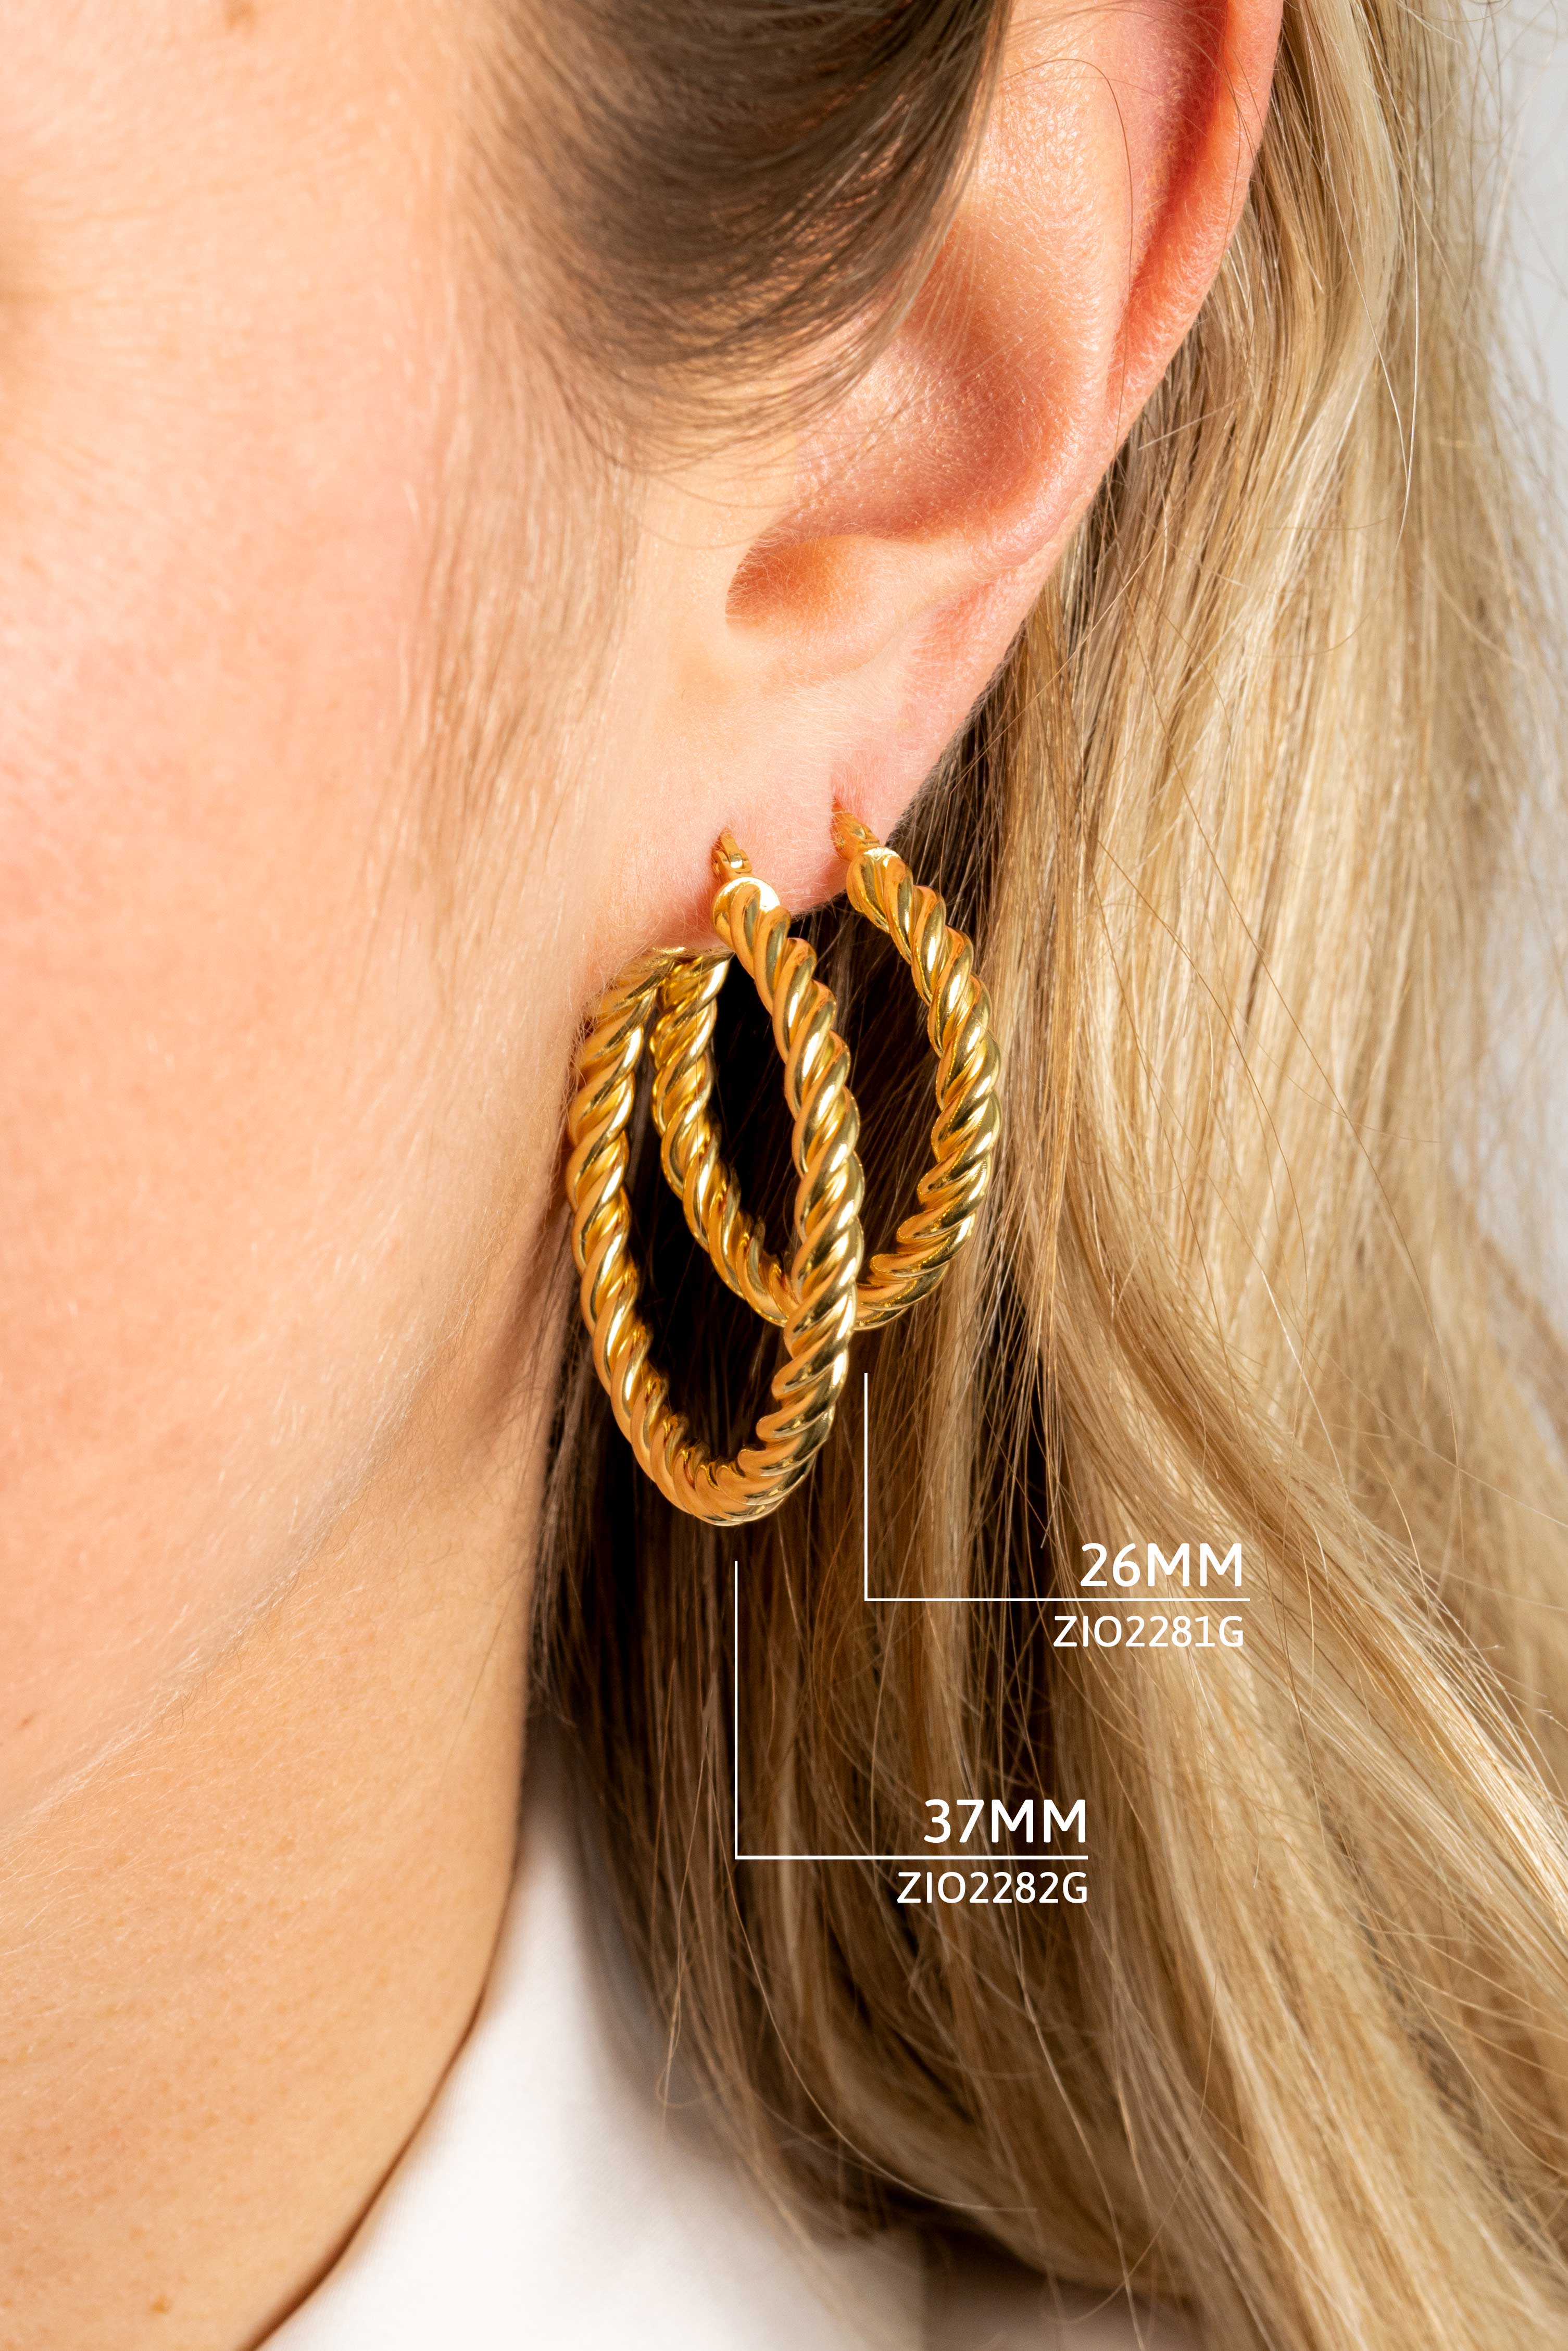 26mm ZINZI Gold Plated Sterling Silver Hoop Earrings with Twisted Tube width 4mm ZIO2281G